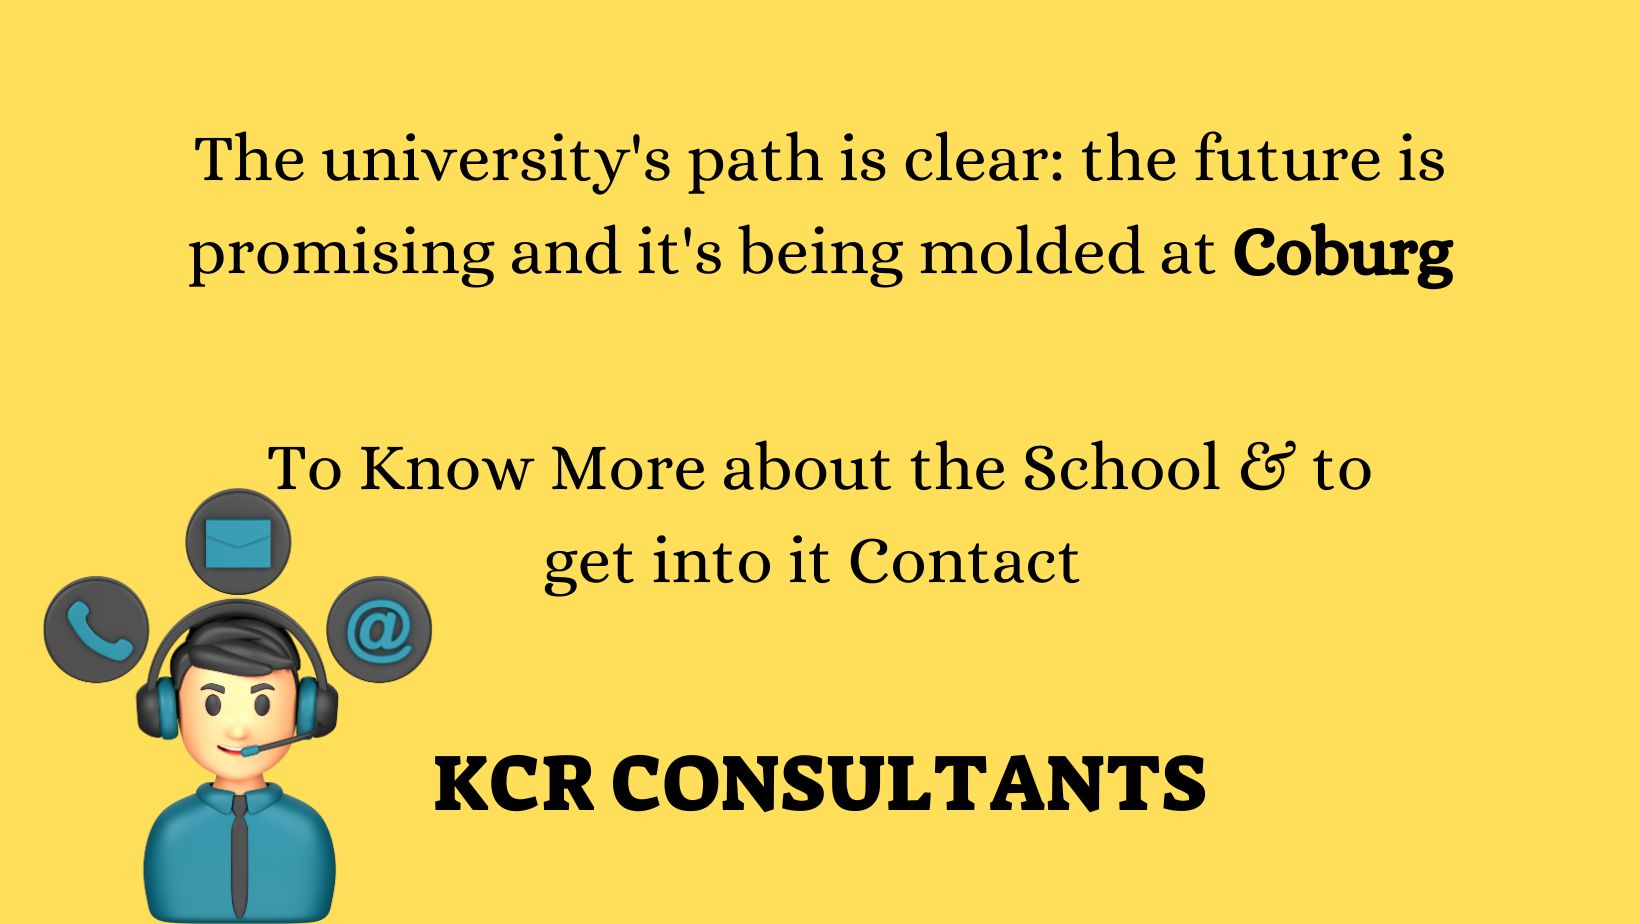 Coburg University of Applied Sciences and Arts - KCR CONSULTANTS - Contact us